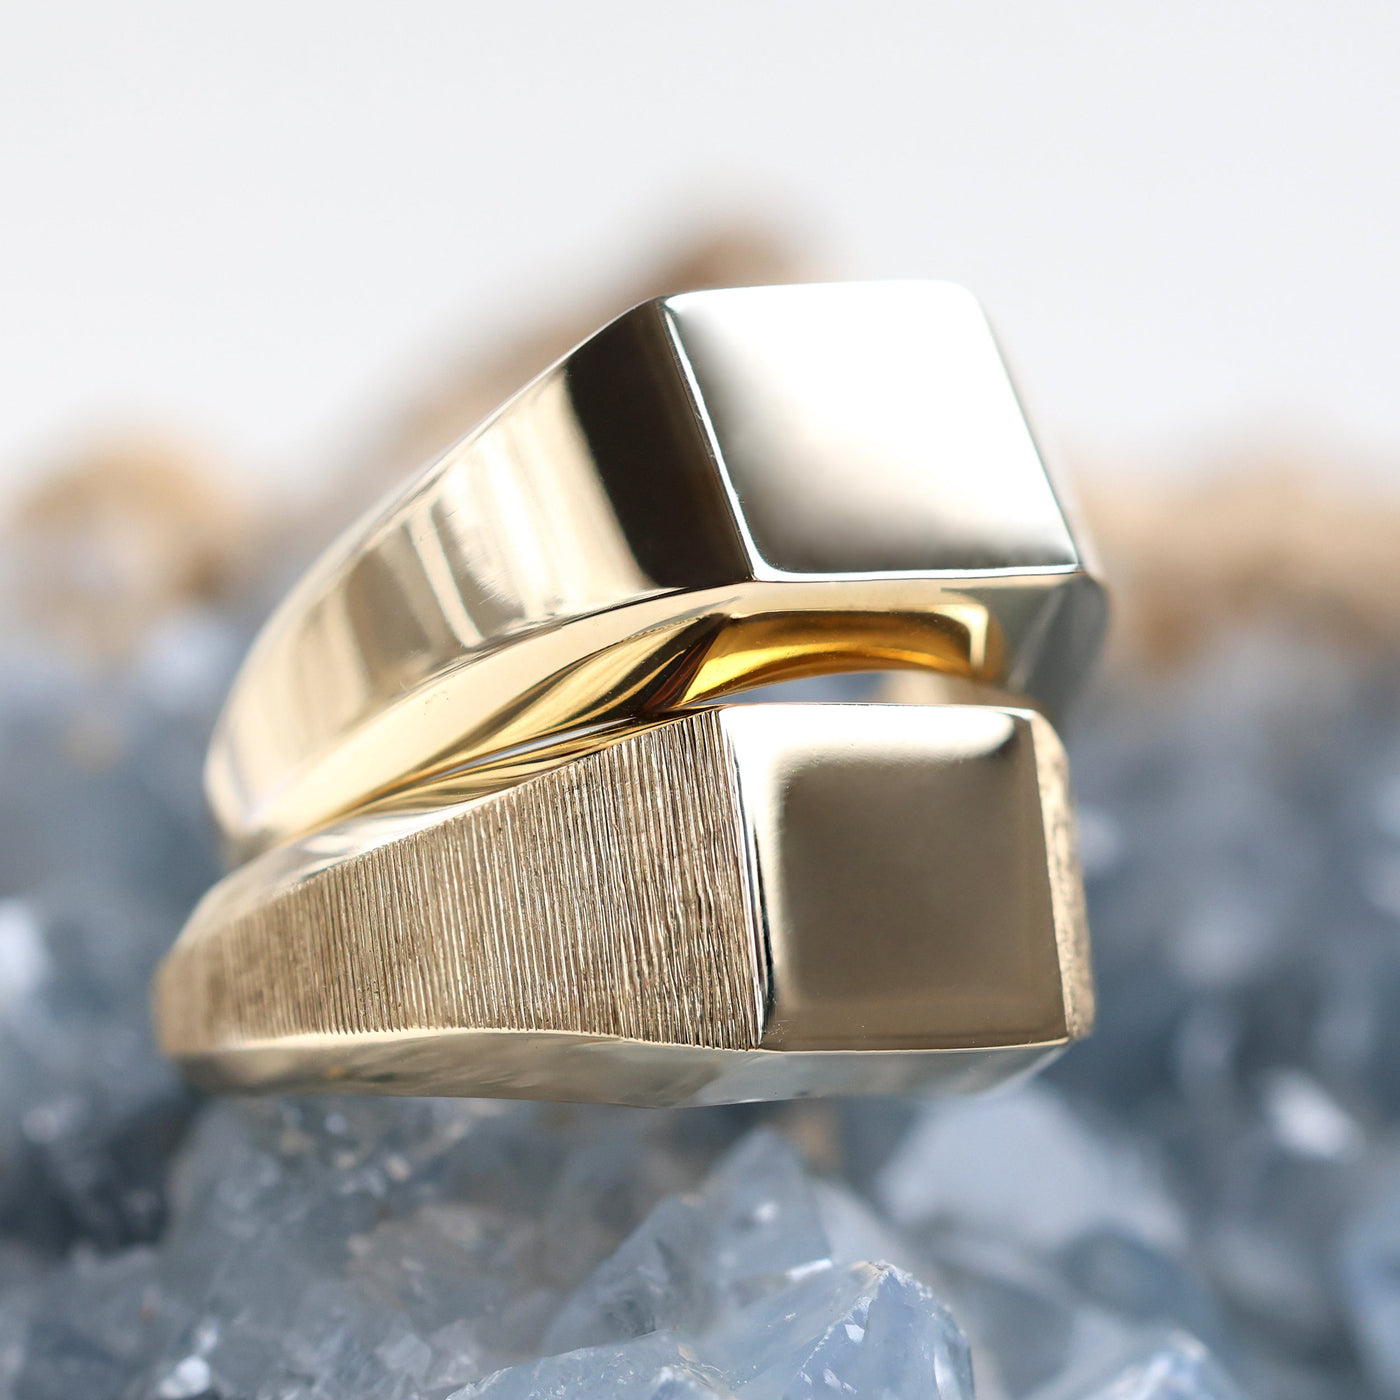 A close-up of a gold signet ring on a rock, showcasing premium metals like sterling silver, solid gold, and platinum. Customizable with gemstones.